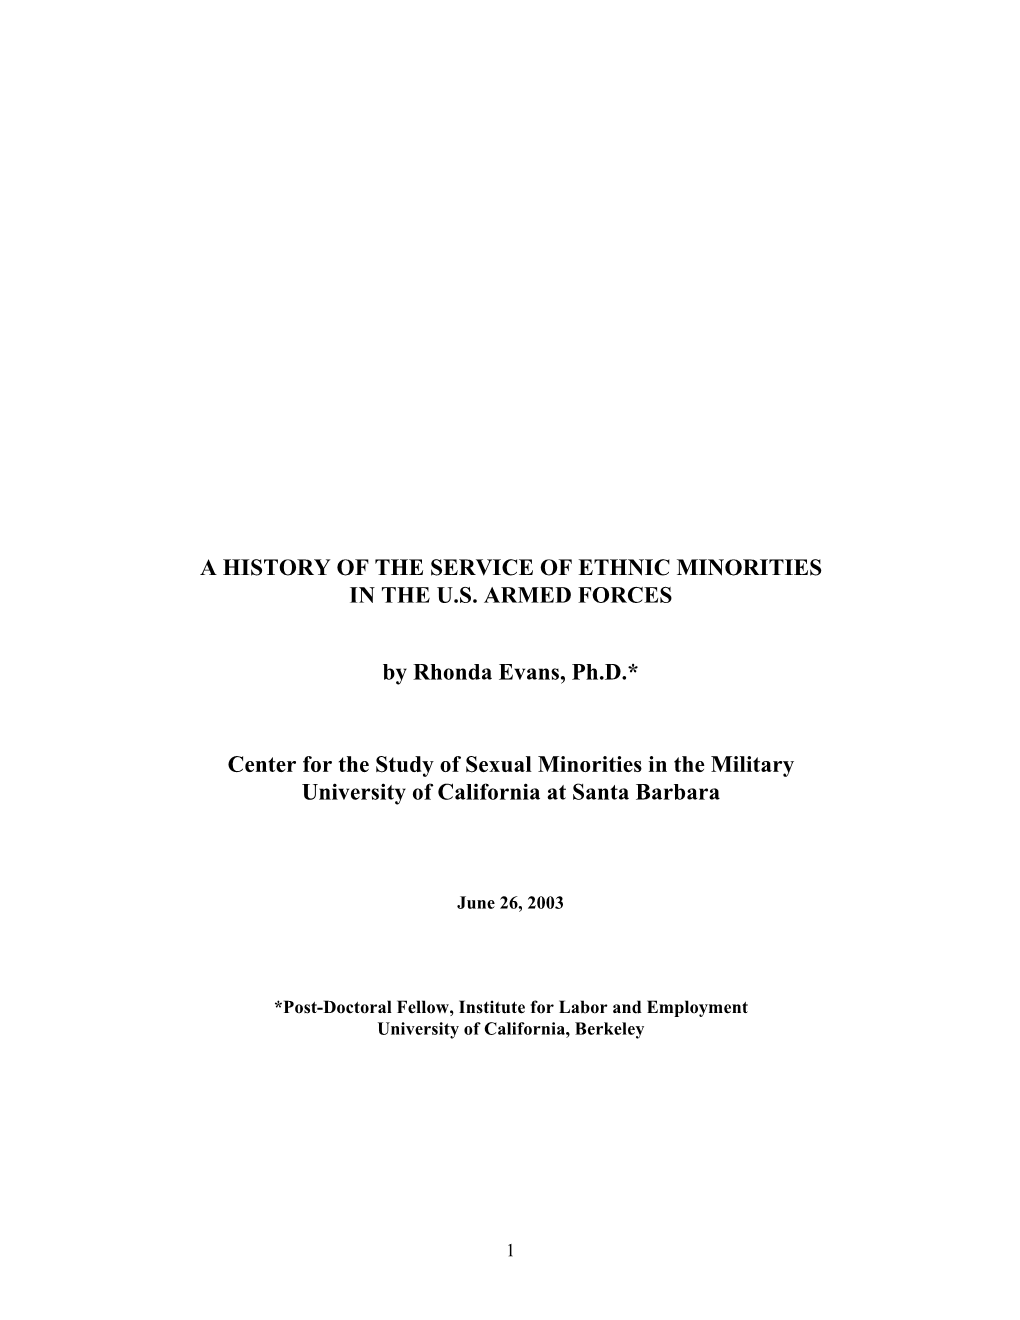 A History of the Service of Ethnic Minorities in the U.S. Armed Forces